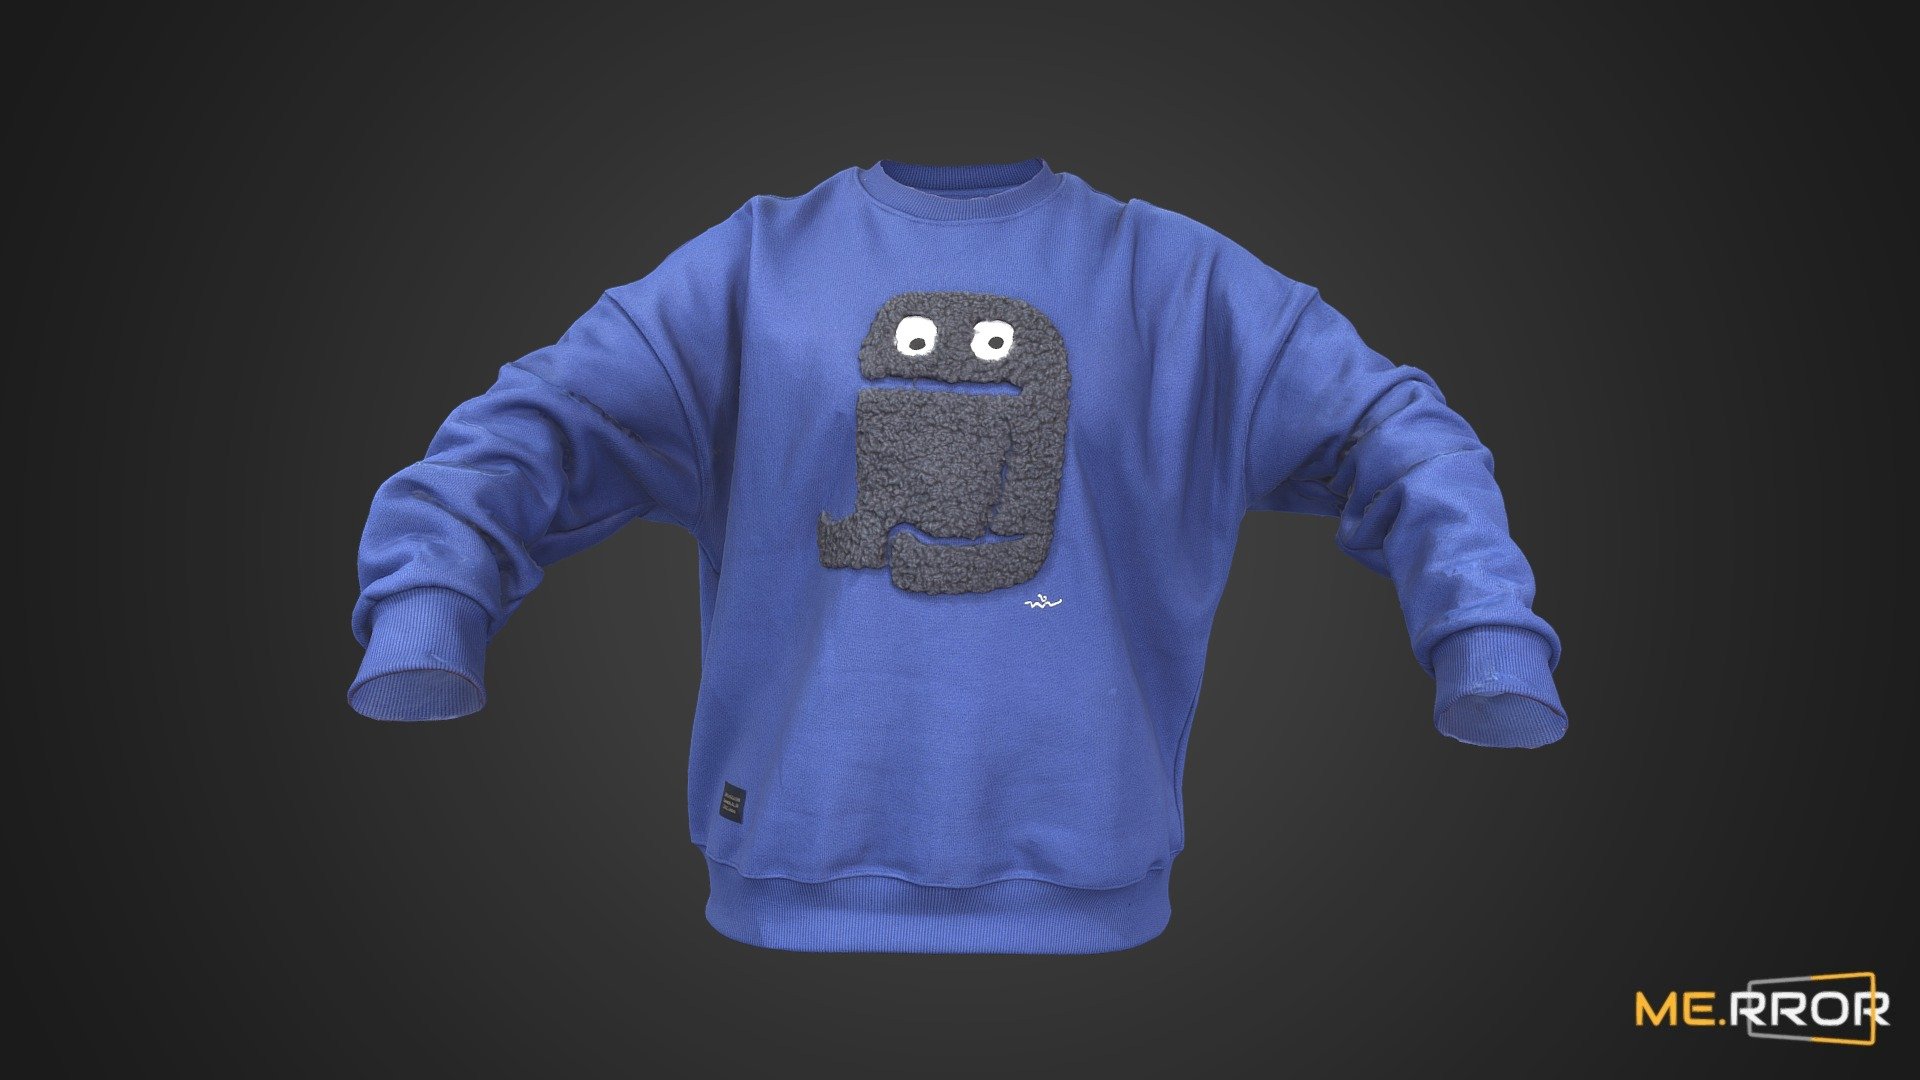 MERROR is a 3D Content PLATFORM which introduces various Asian assets to the 3D world


3DScanning #Photogrametry #ME.RROR - Blue Monster Sweatshirts - Buy Royalty Free 3D model by ME.RROR (@merror) 3d model